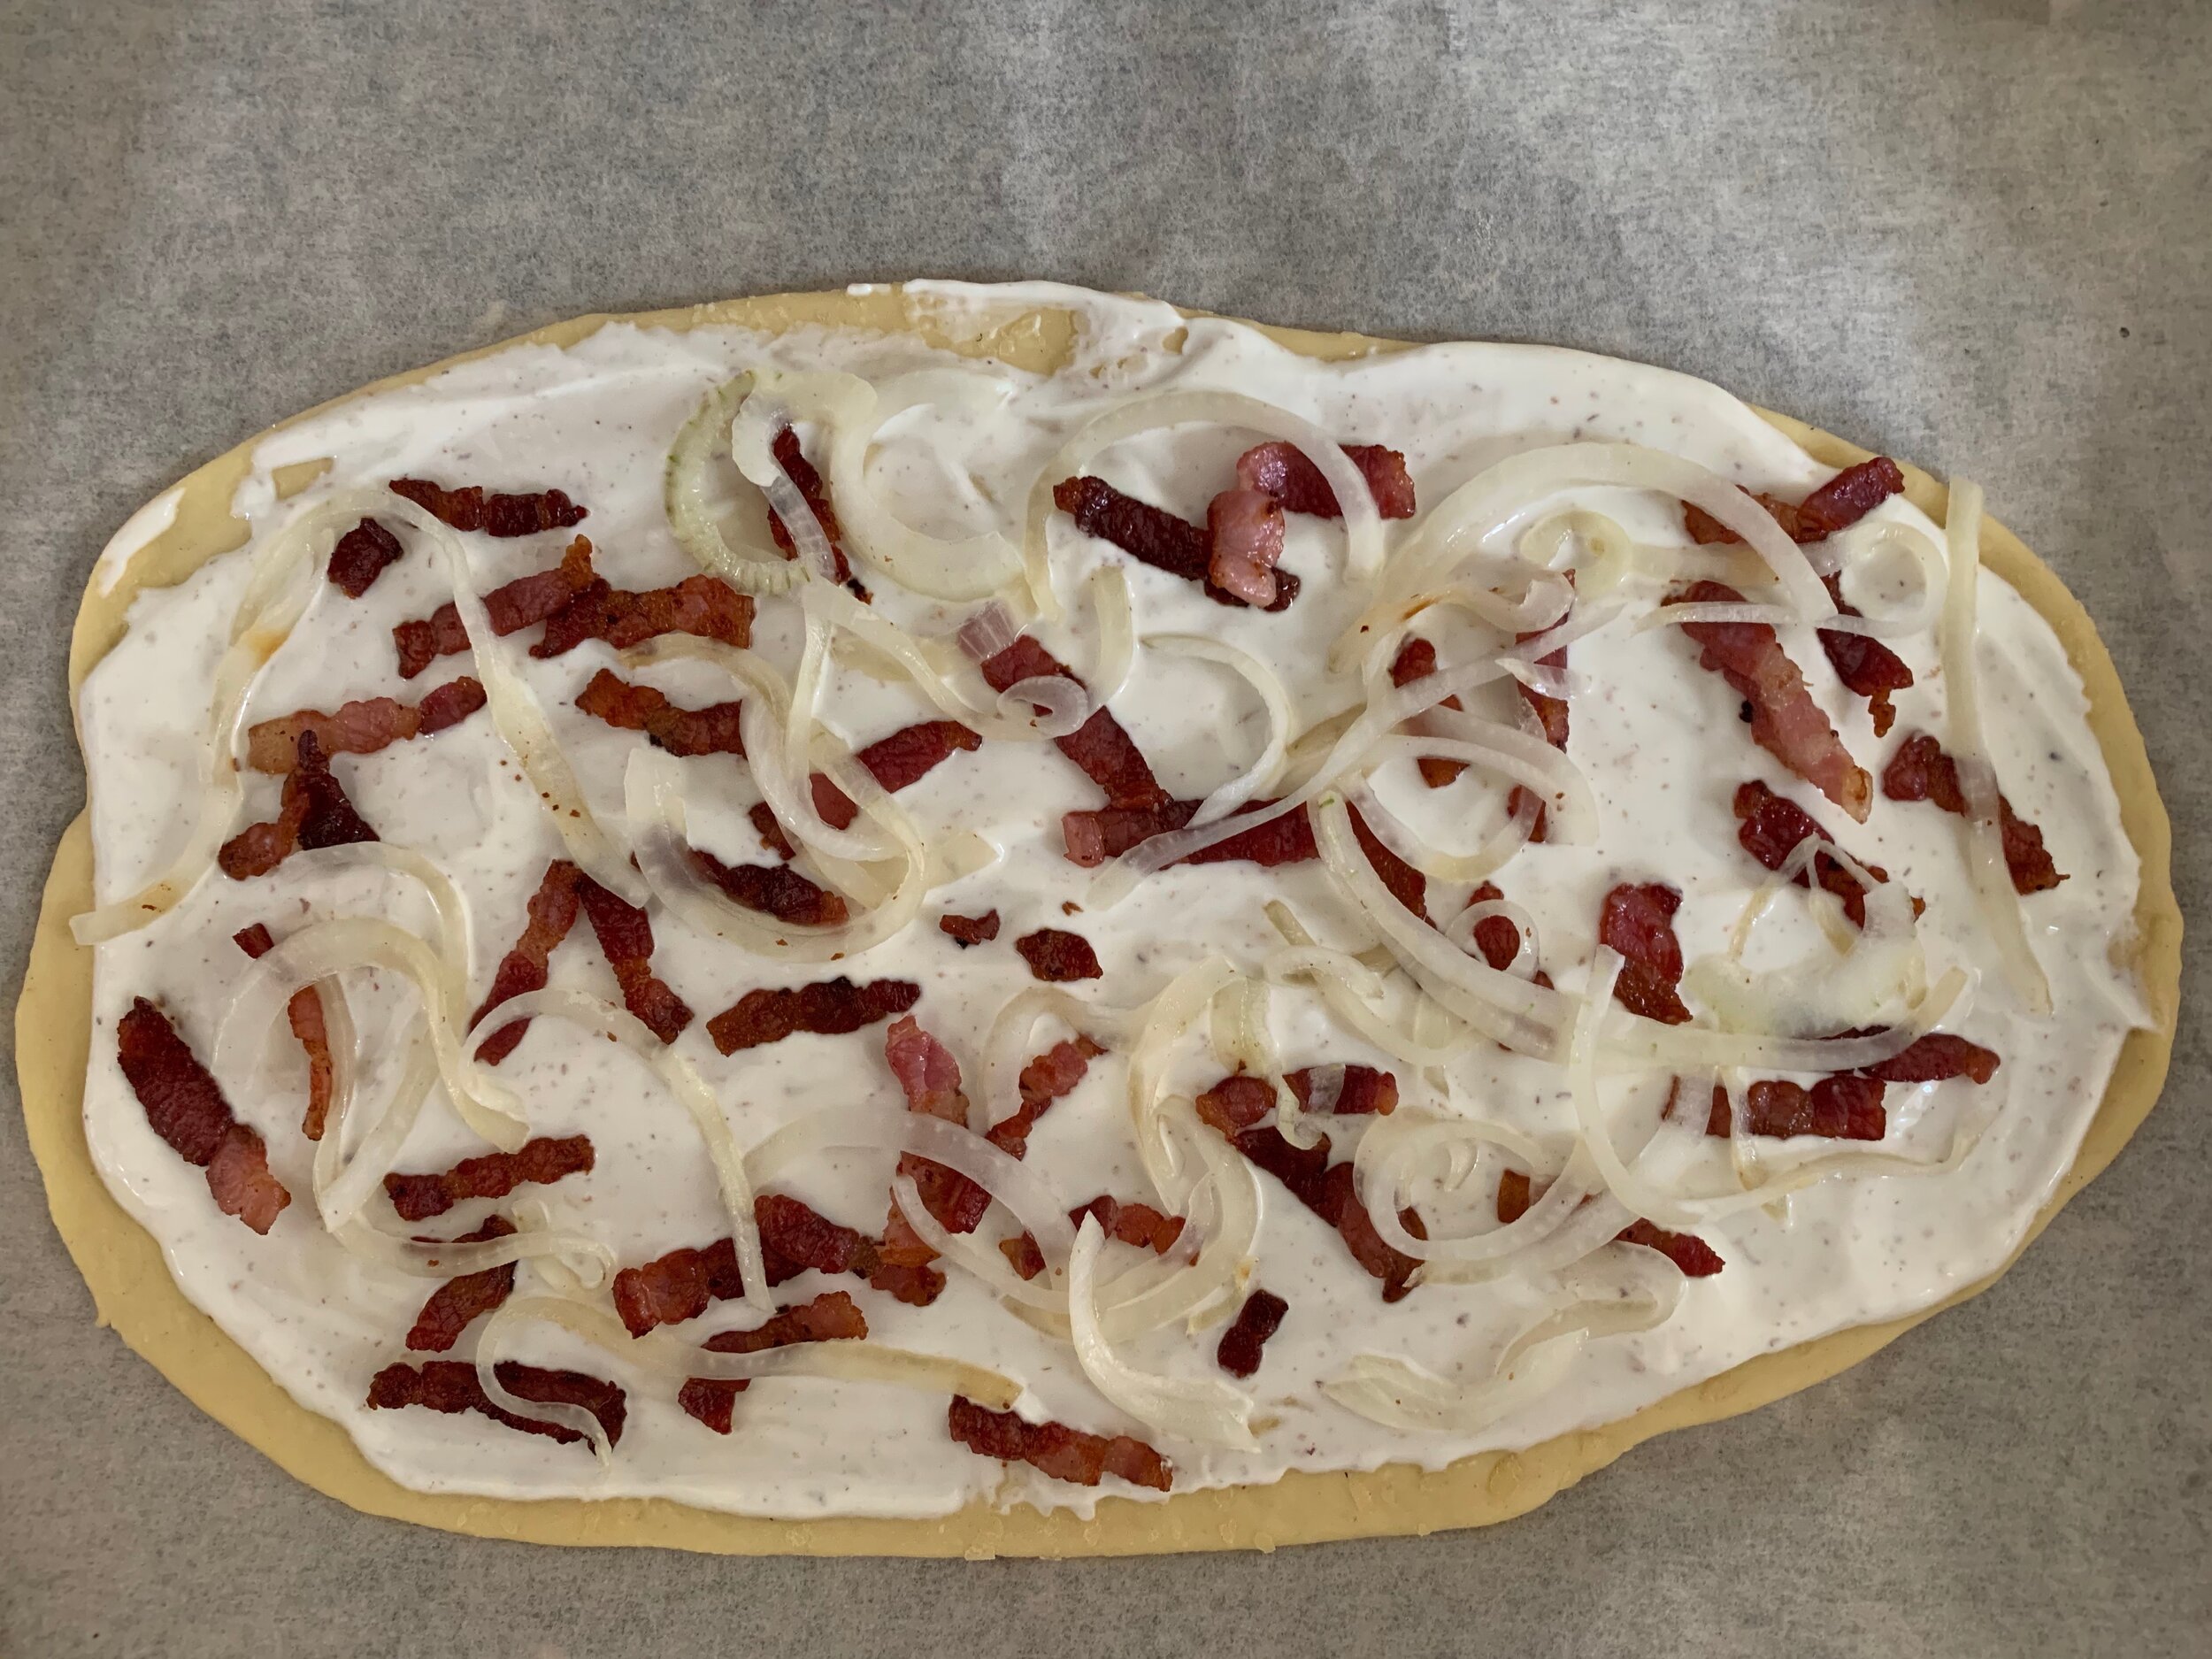 Assembled tarte flambée ready to go in the oven